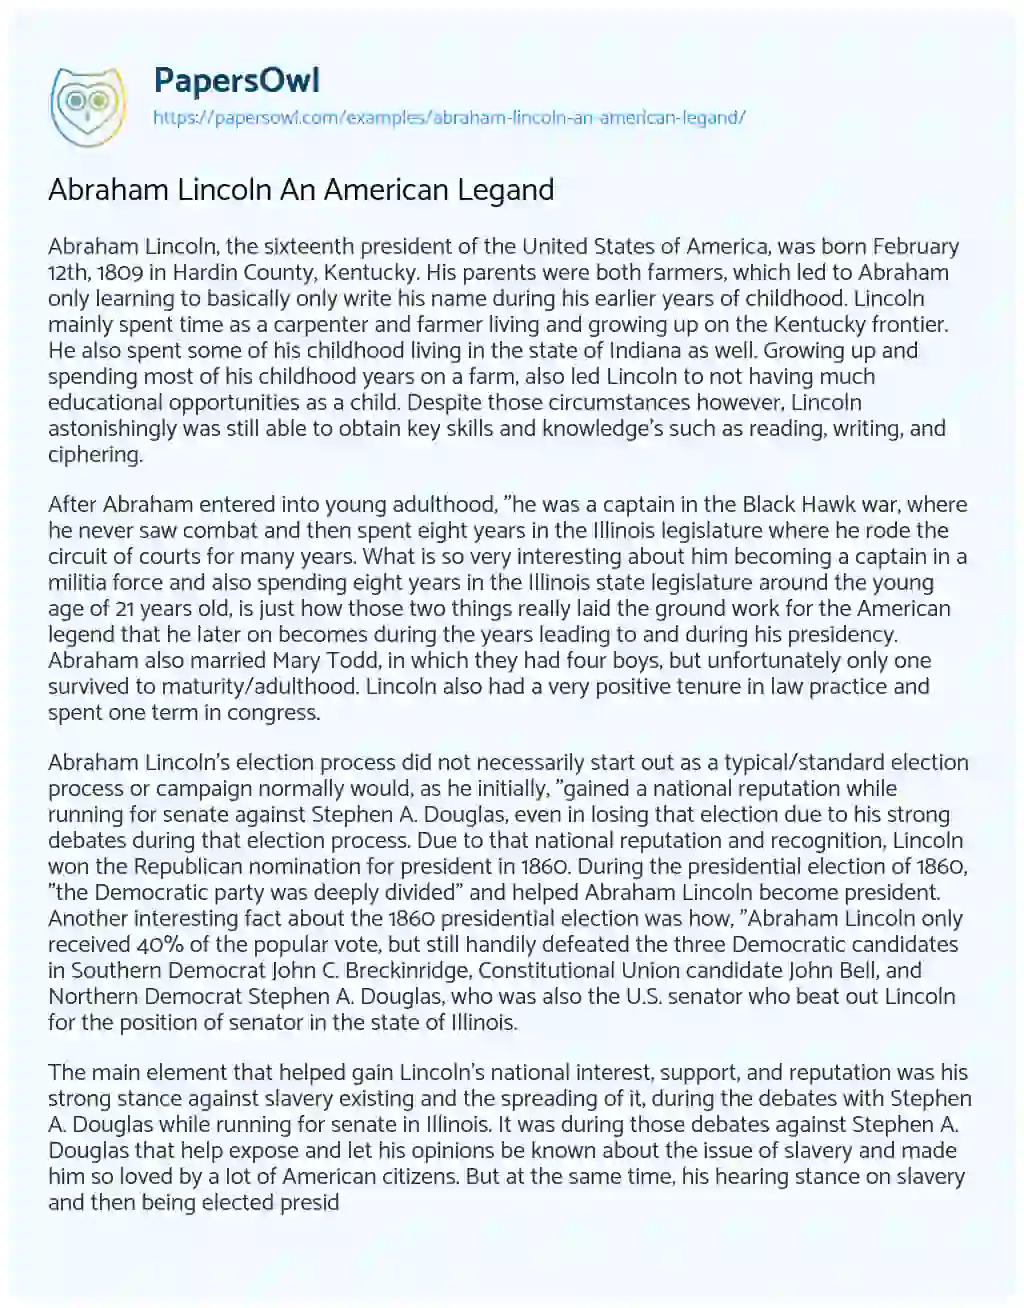 Essay on Abraham Lincoln an American Legand